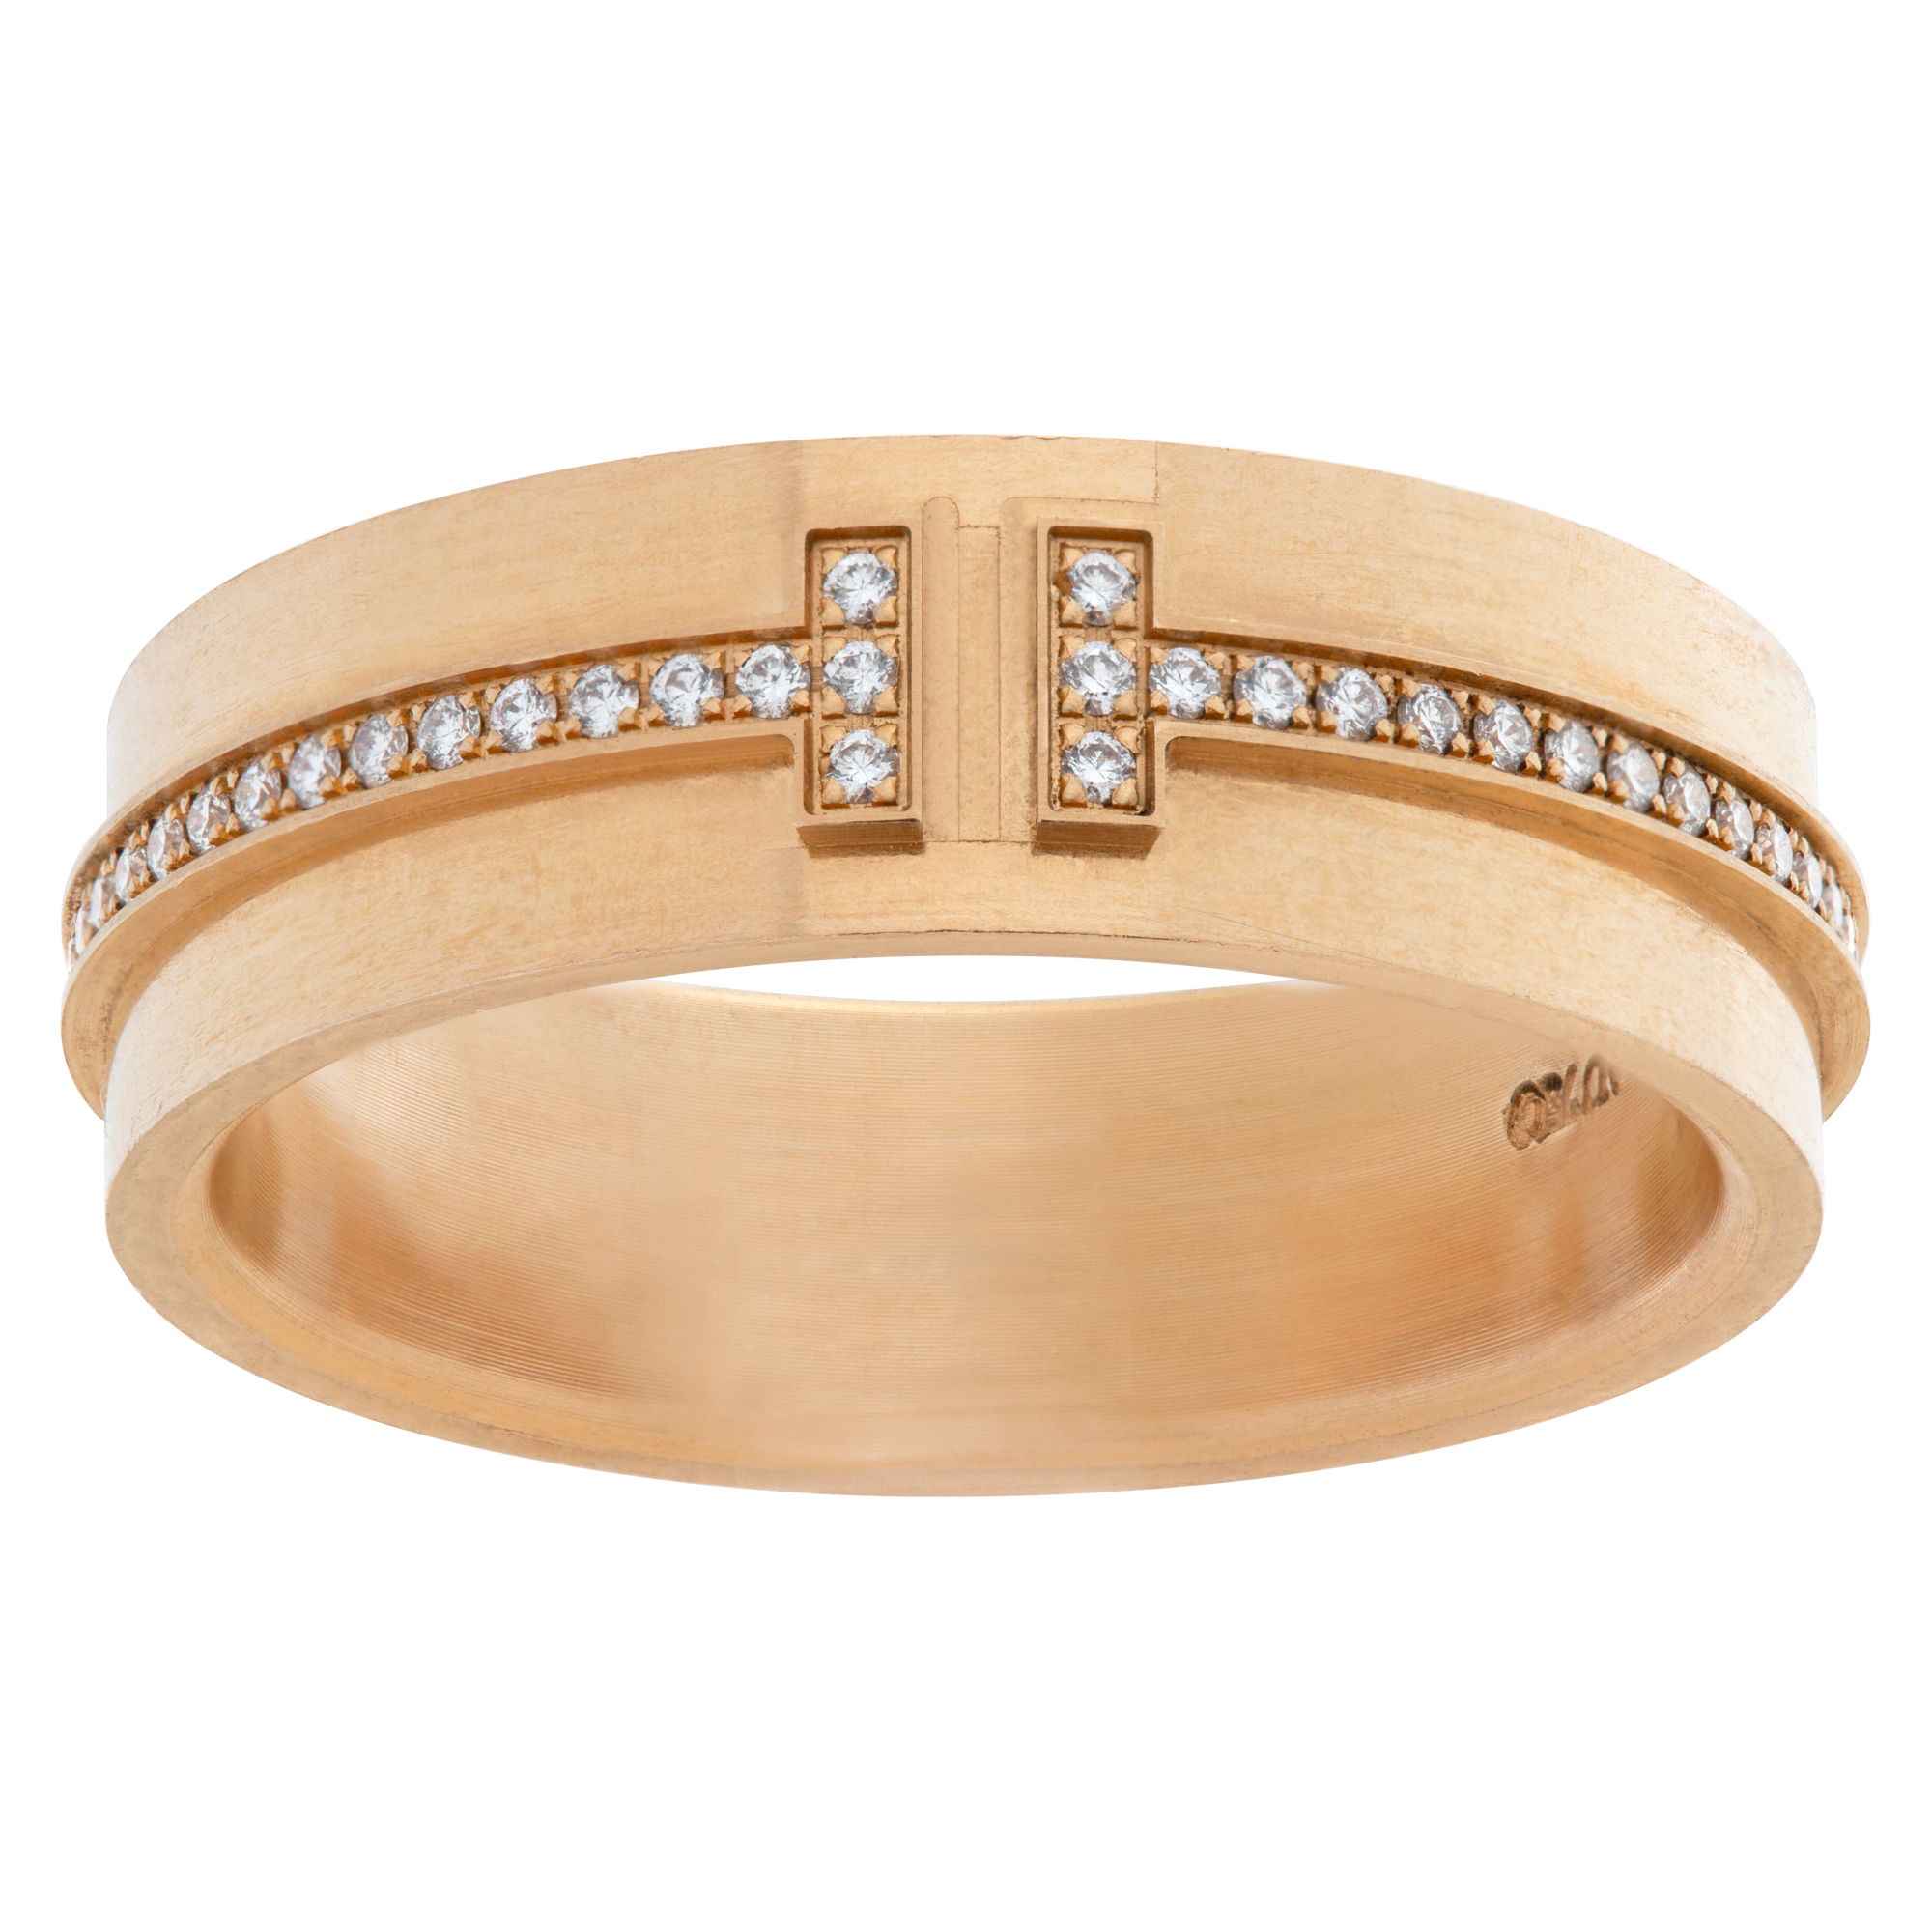 Tiffany & Co. Wide Diamond Ring In 18k Rose Gold image 1